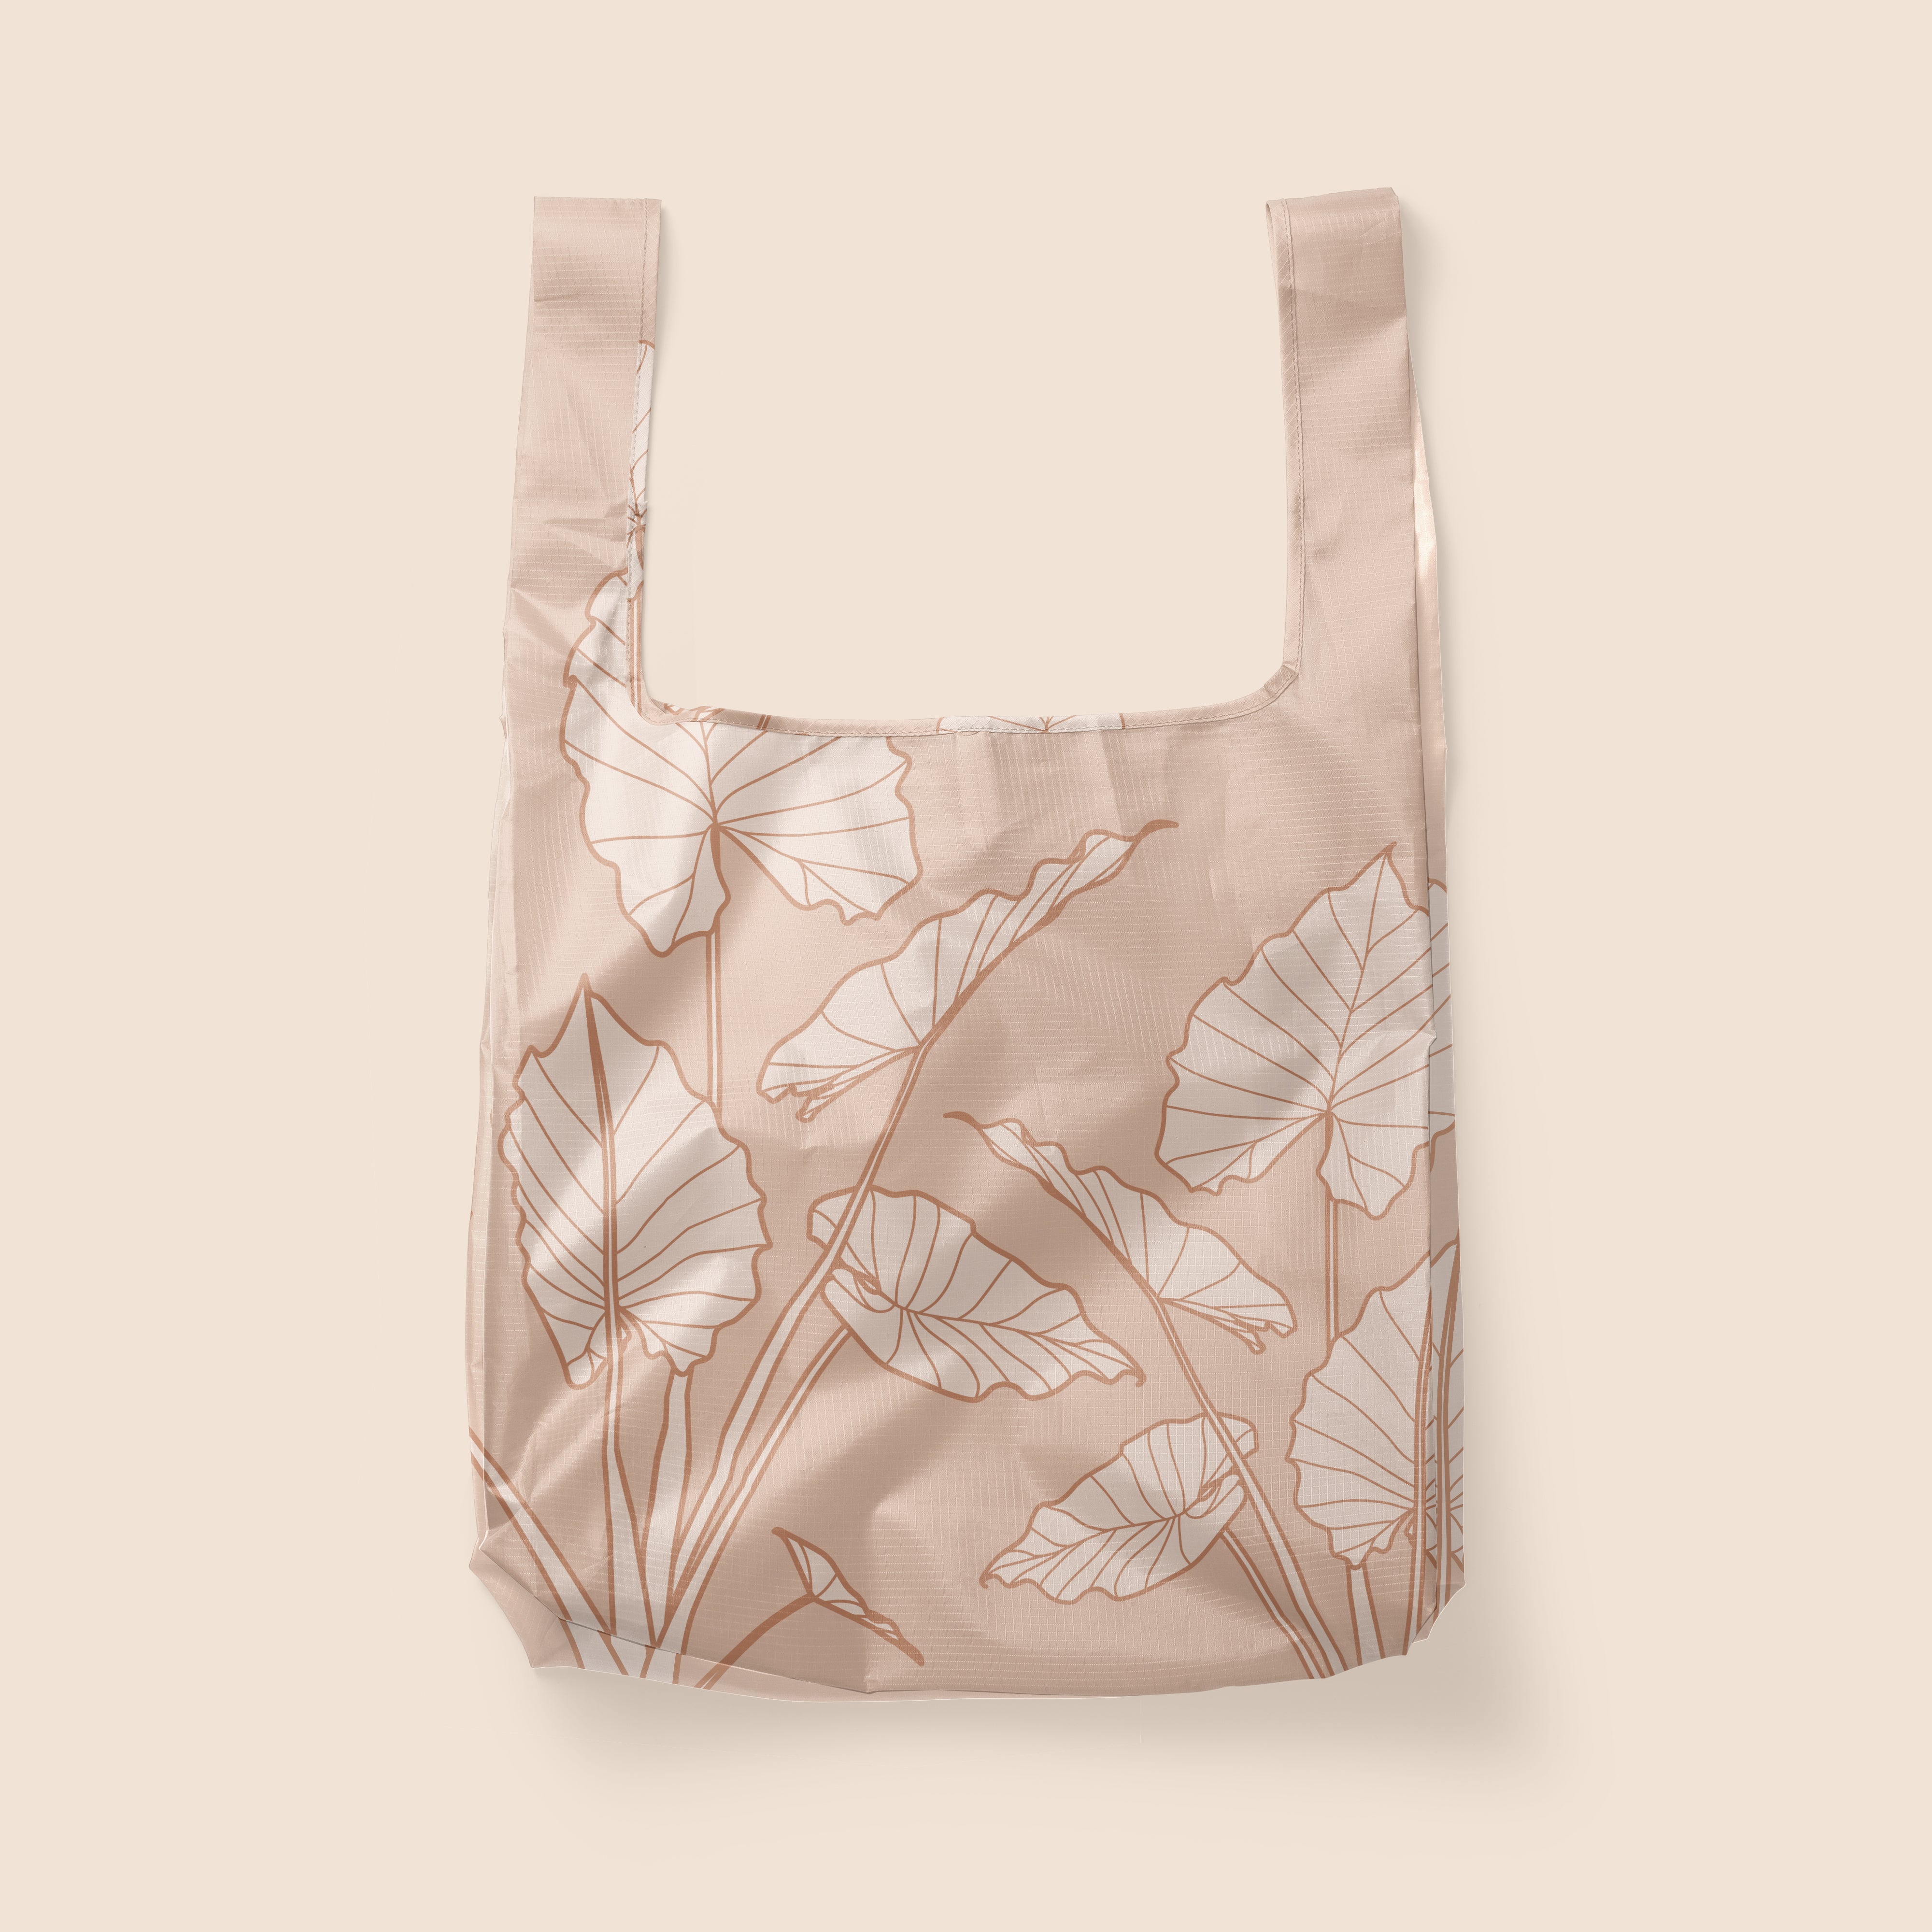 Photographed in front of a white background is a light pink / tan nylon reusable tote with cream and darker terracotta line drawings of alocasia leaves. There is a squared off design to the bag and two handles that can be held or used over your shoulder.